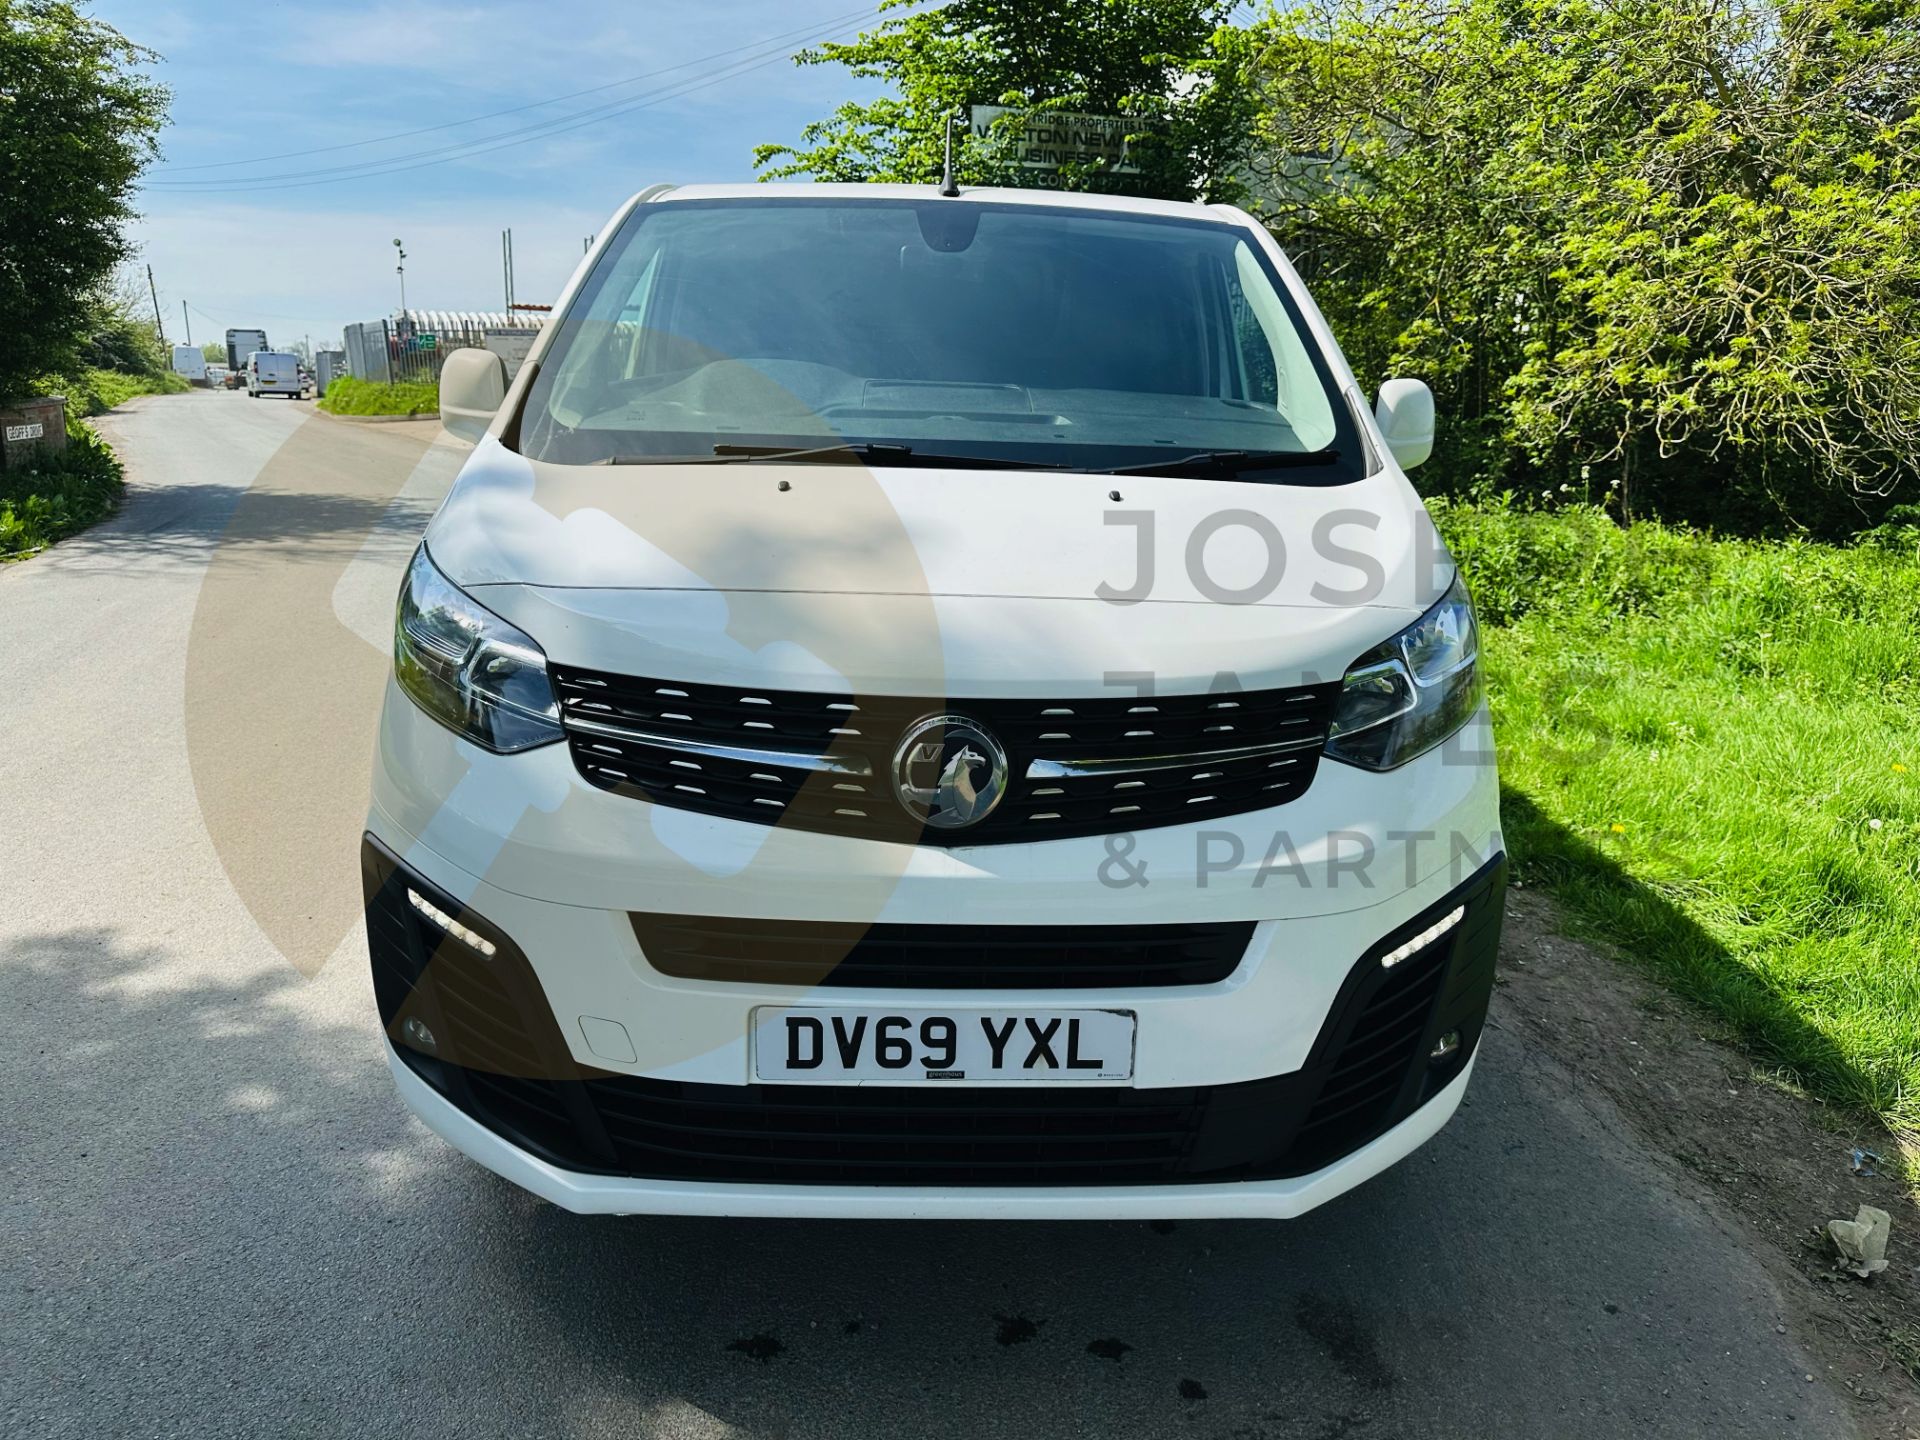 (On Sale) VAUXHALL VIVARO 2900 S/S *SPORTIVE EDITION* EXTENDED FRAME (BLUEINJECTION) - 2020 MODEL - Image 3 of 32